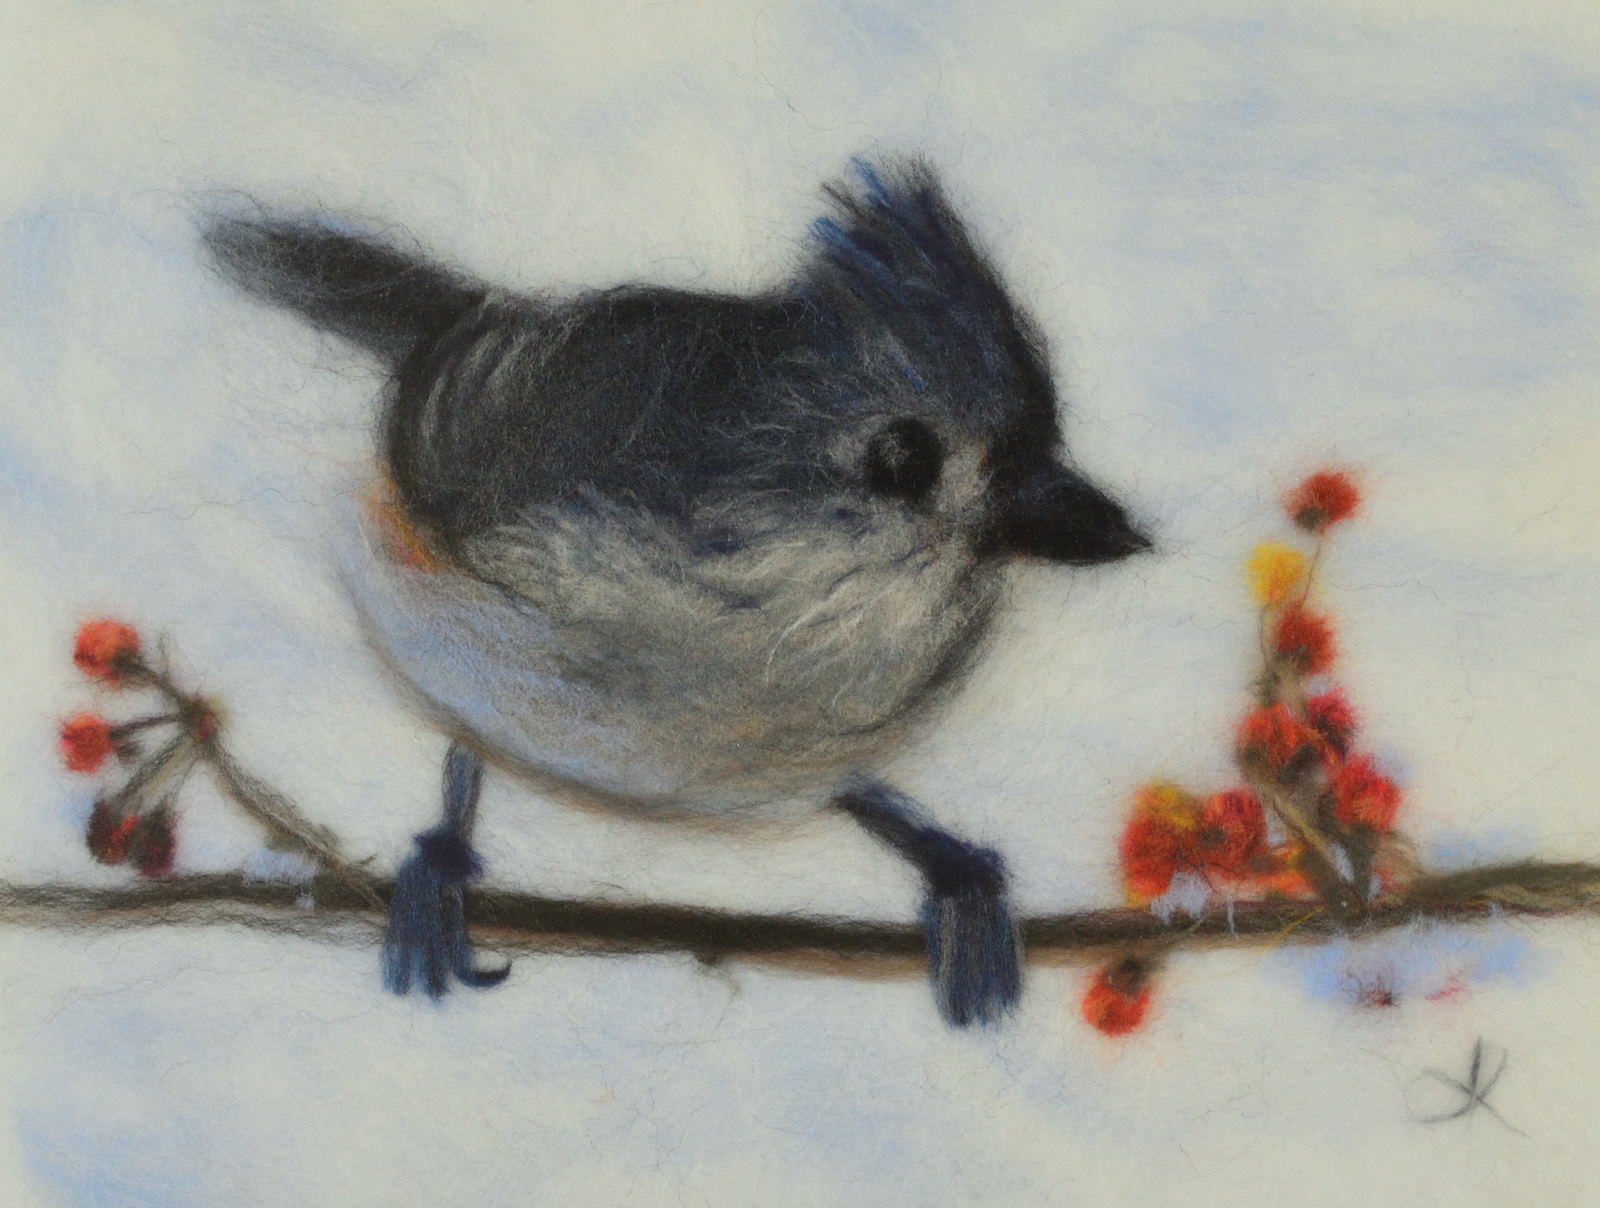 Tufted titmouse. Wool Art Gallery. Picture made of merino wool